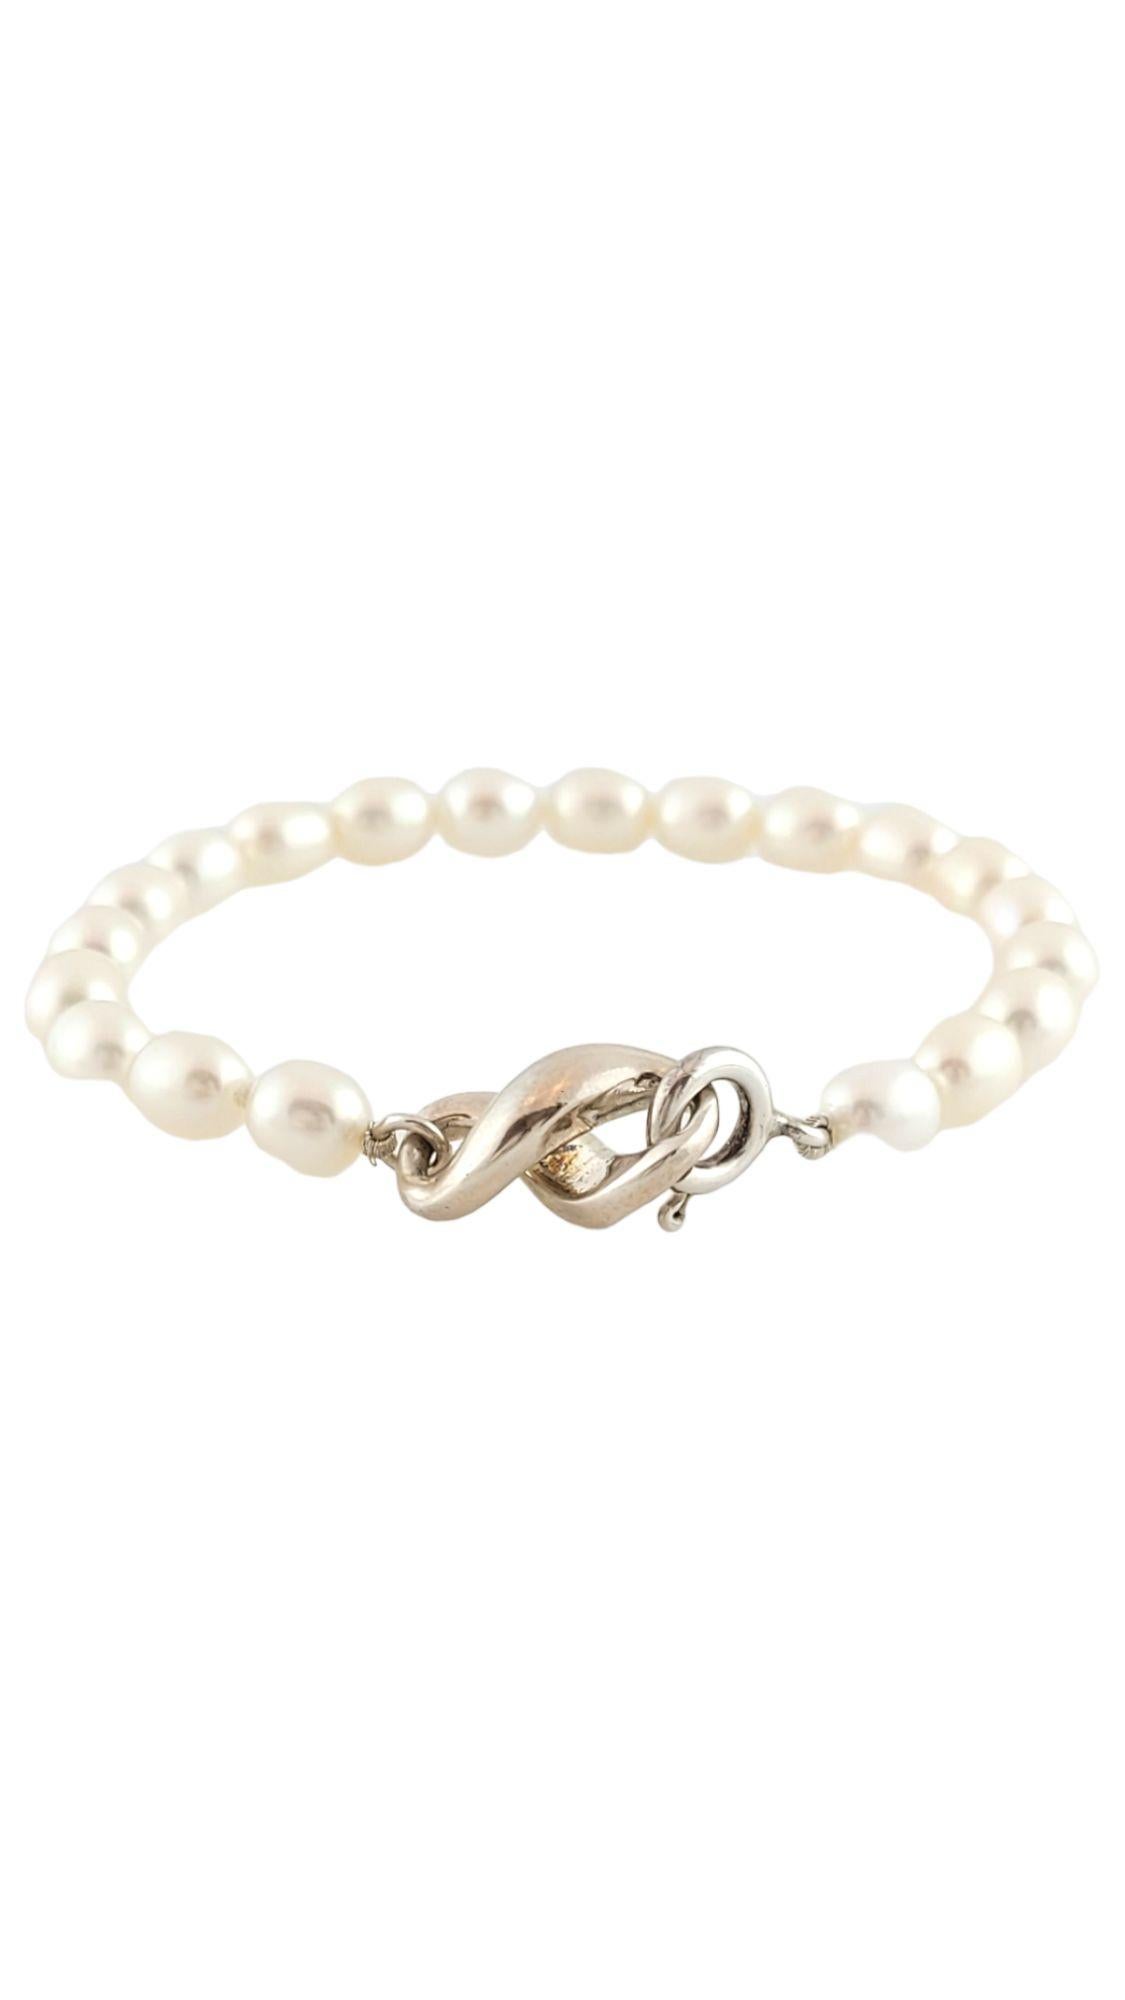 Tiffany & Co Sterling Silver Infinity Figure 8 Pearl Bracelet

This gorgeous sterling silver infinity figure 8 bracelet features 20 beautiful pearls.

Pearls approximately 6.4mm each

Length: 6.25